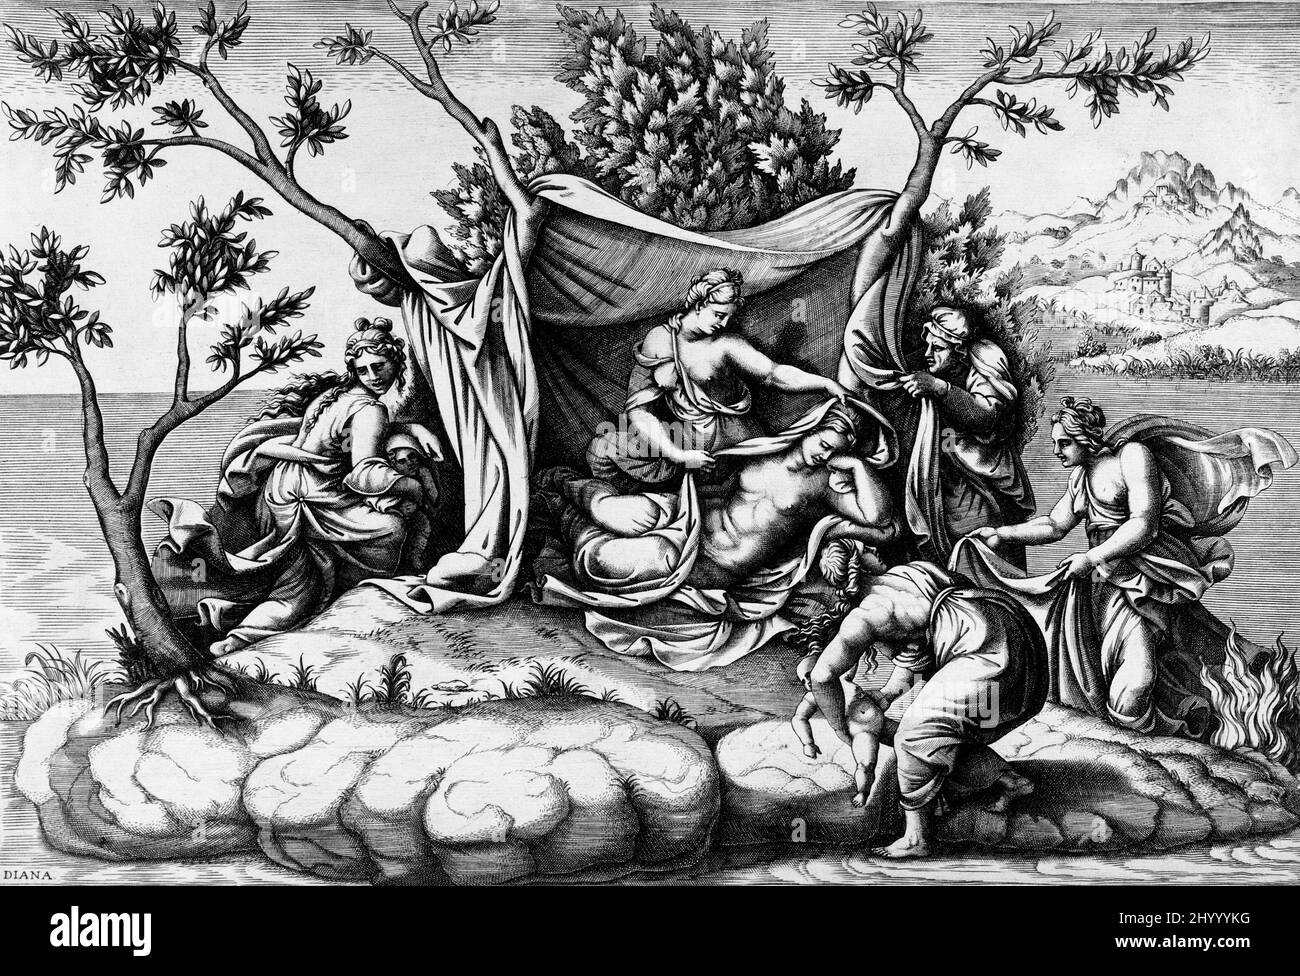 The Birth of Apollo and Diana. Diana Scultori (Italy, Mantua, before 1530-after 1588). Italy, before 1575. Prints; engravings. Engraving Stock Photo